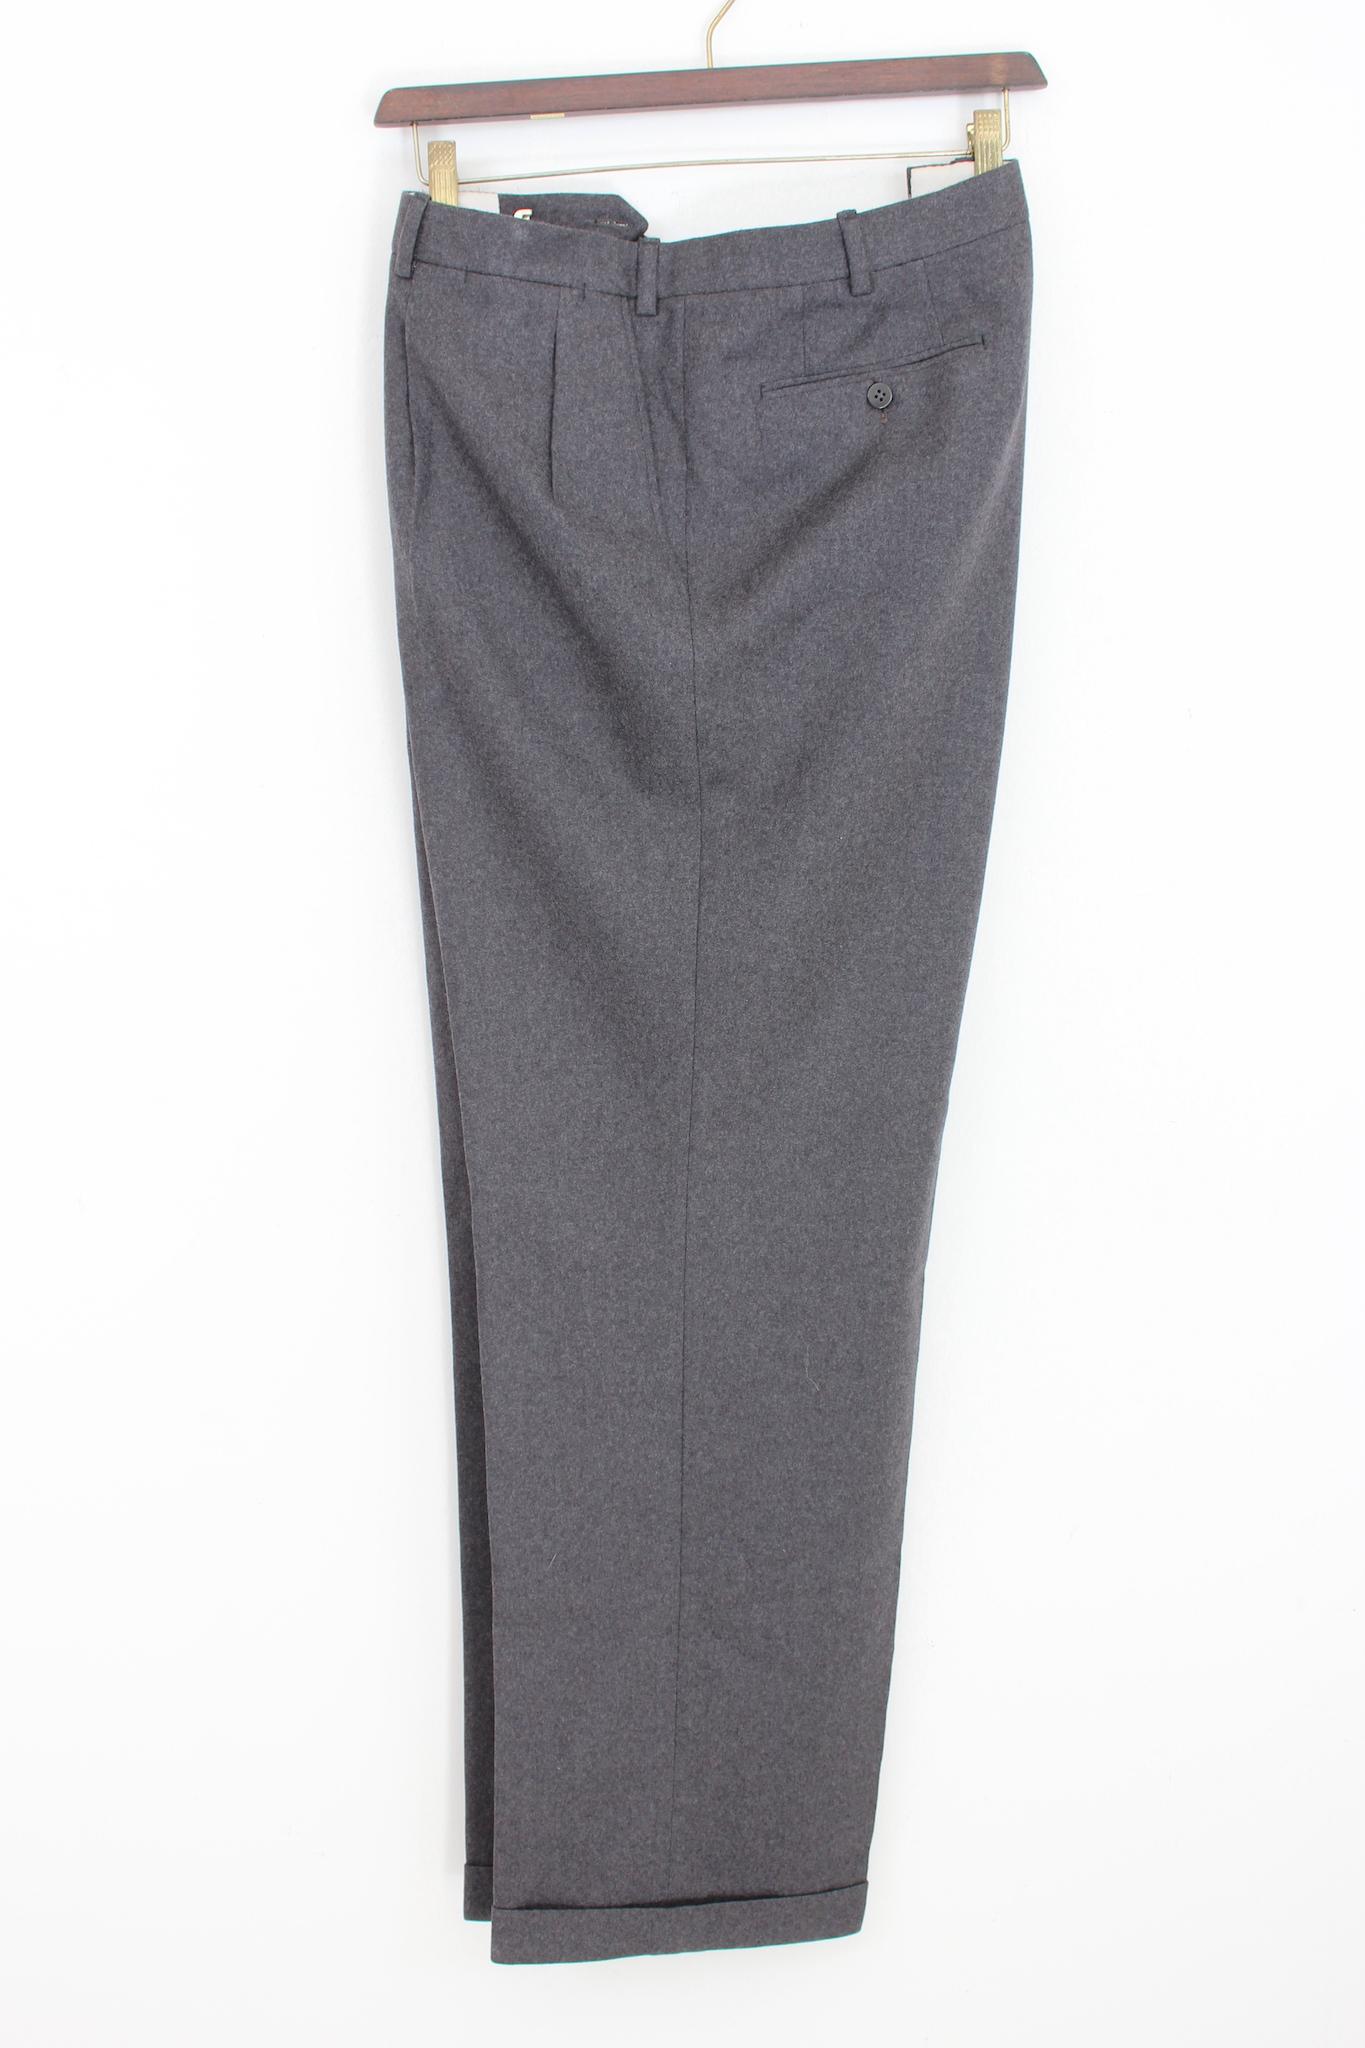 Brioni 90s vintage elegant pants. Straight model, gray color, 100% wool. Made in Italy. New without tag, coming from warehouse stock.

Size: 64 It 54 Us 54 Uk

Waist: 55 cm
Length: 108 cm
Hem: 25 cm